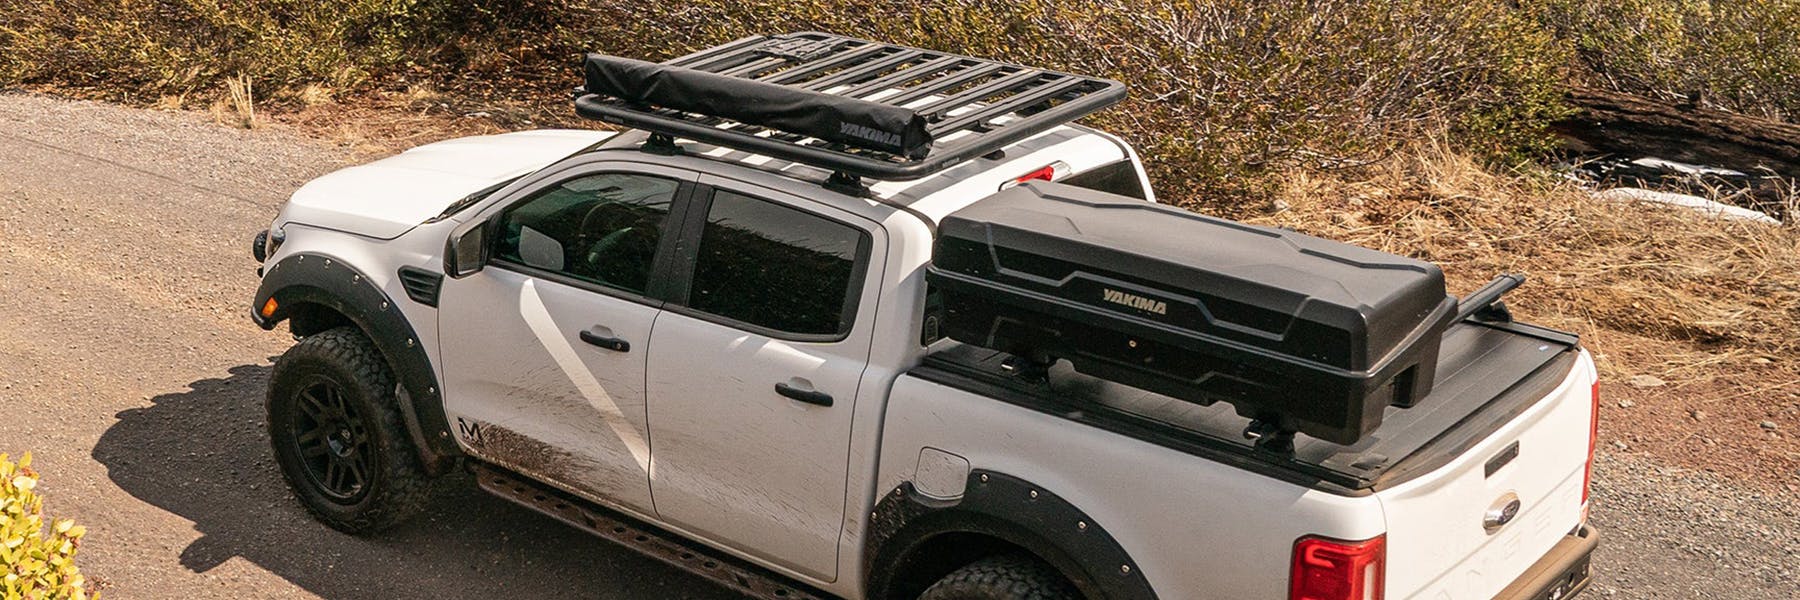 Yakima Truck Bed Cargo Carriers